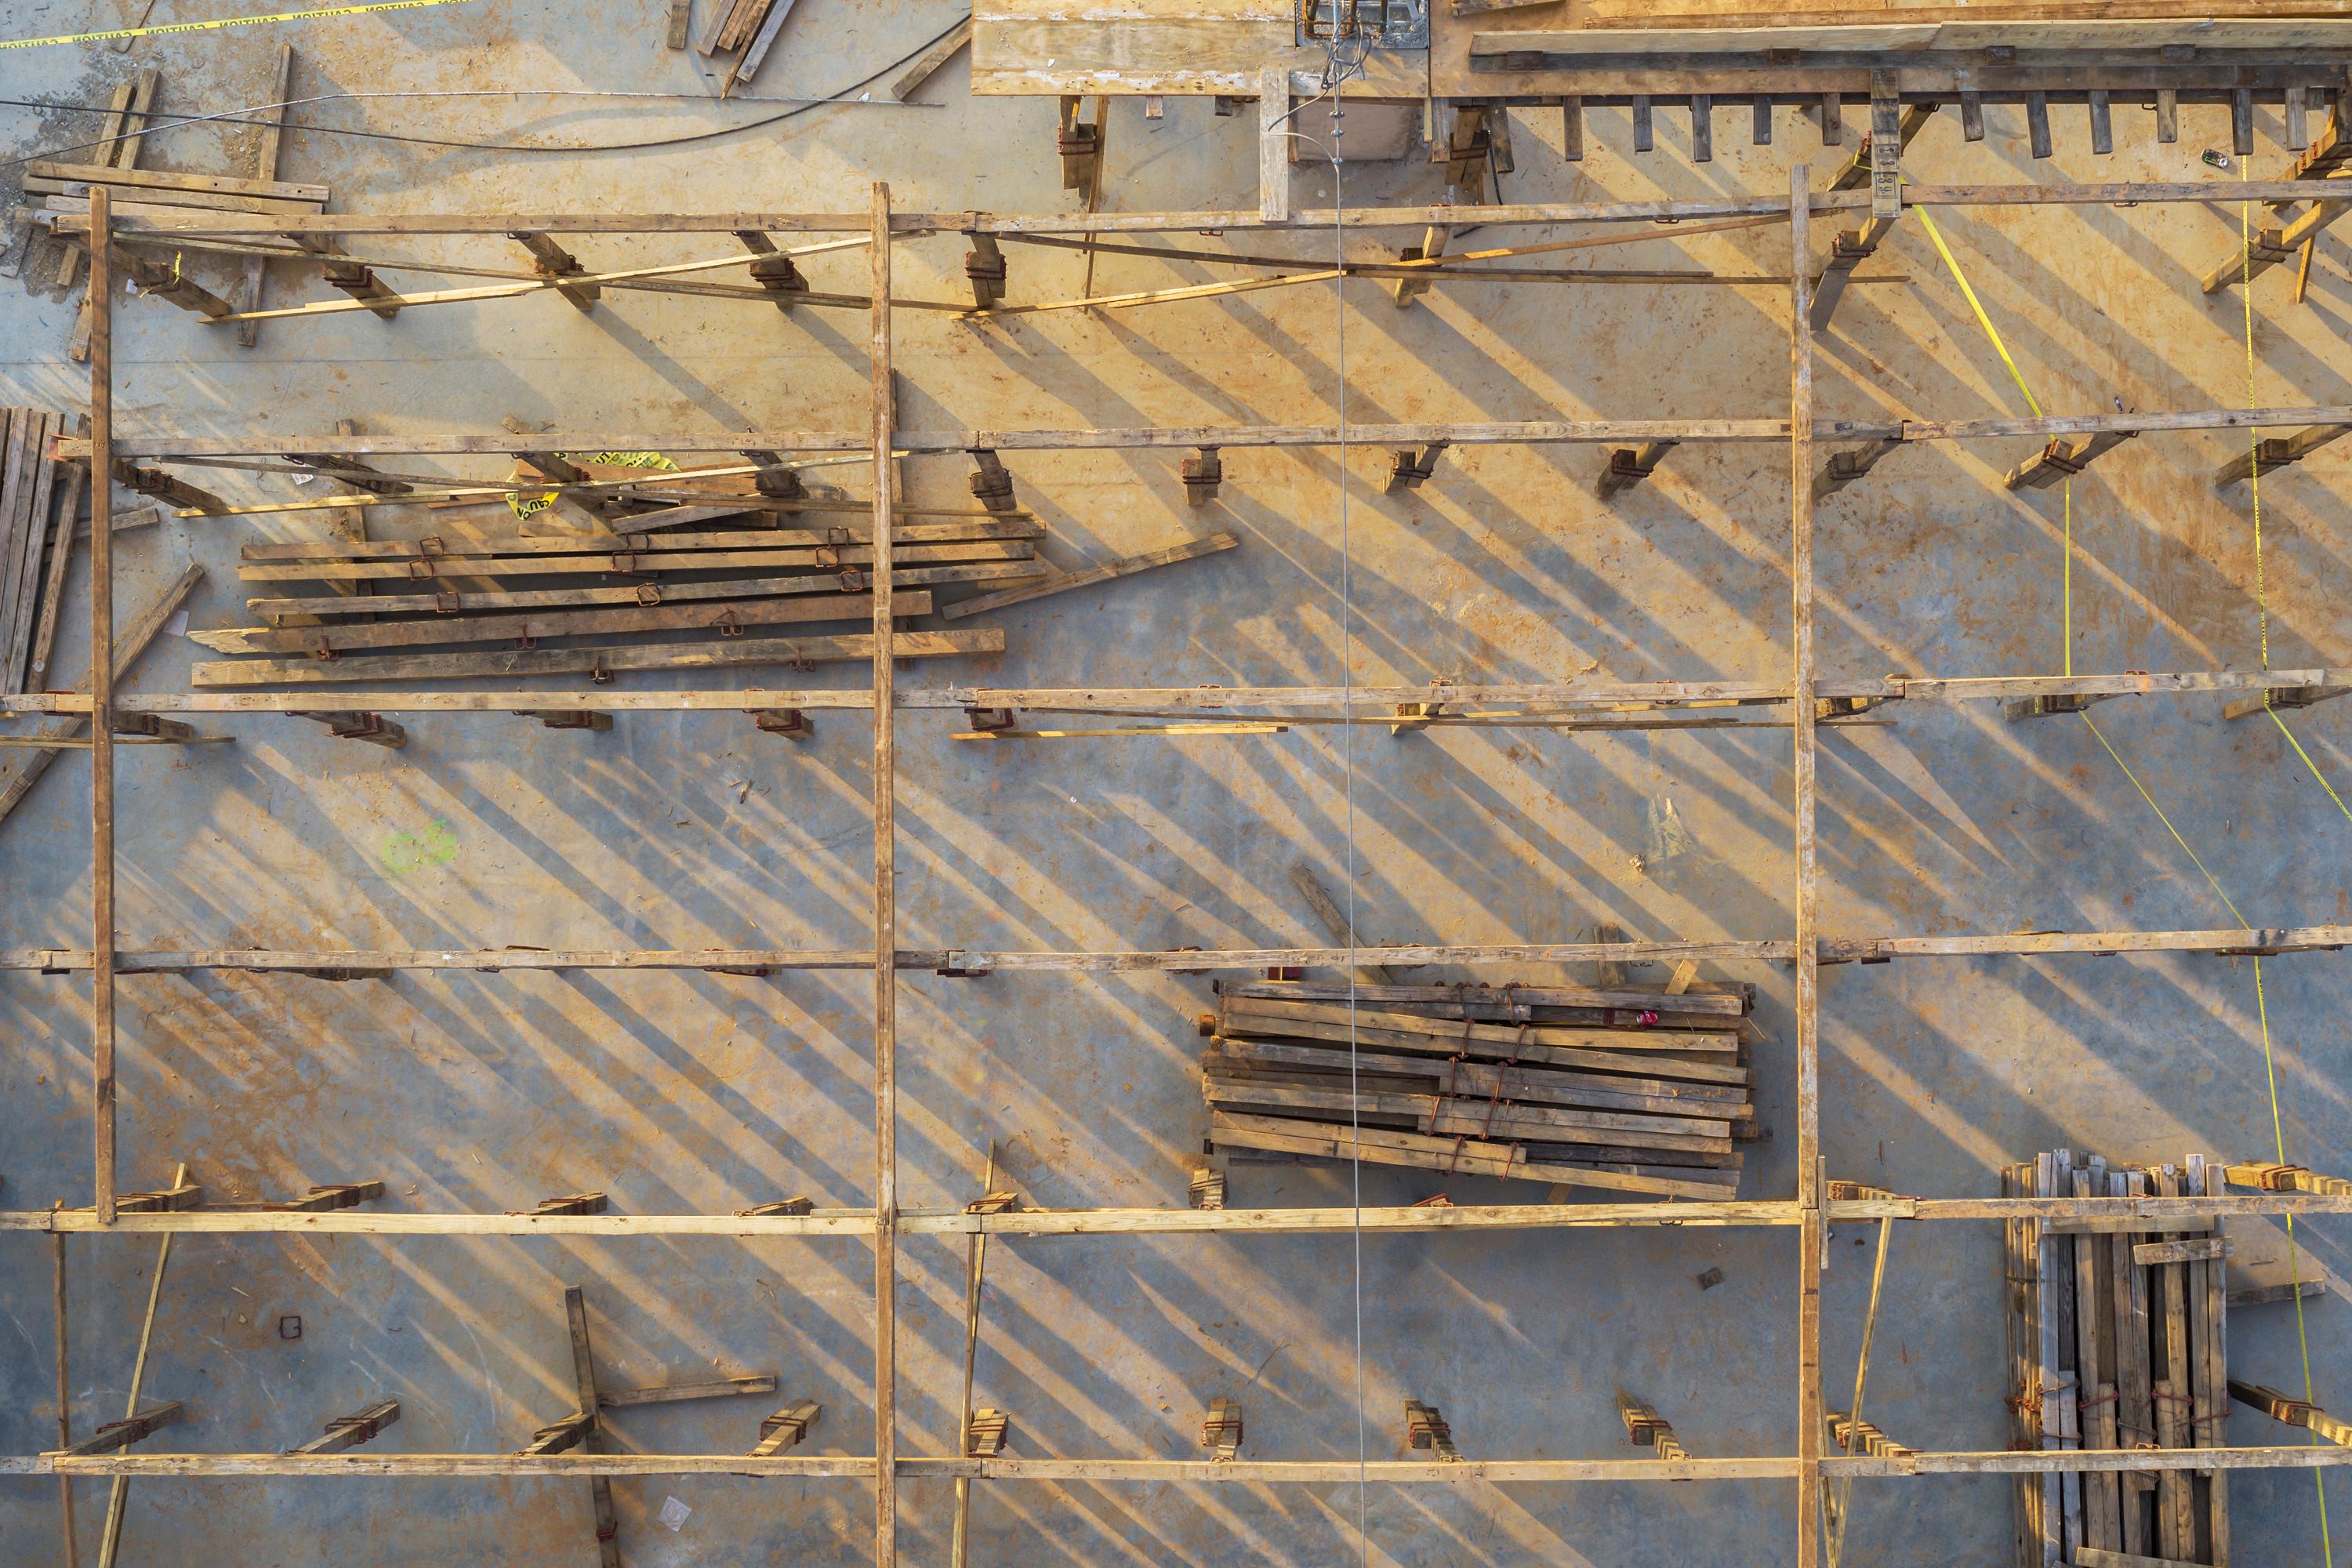 Peter Essick Abstract Photograph - "Construction Site, Decatur, GA #3" - Aerial Landscape Photography, Ansel Adams